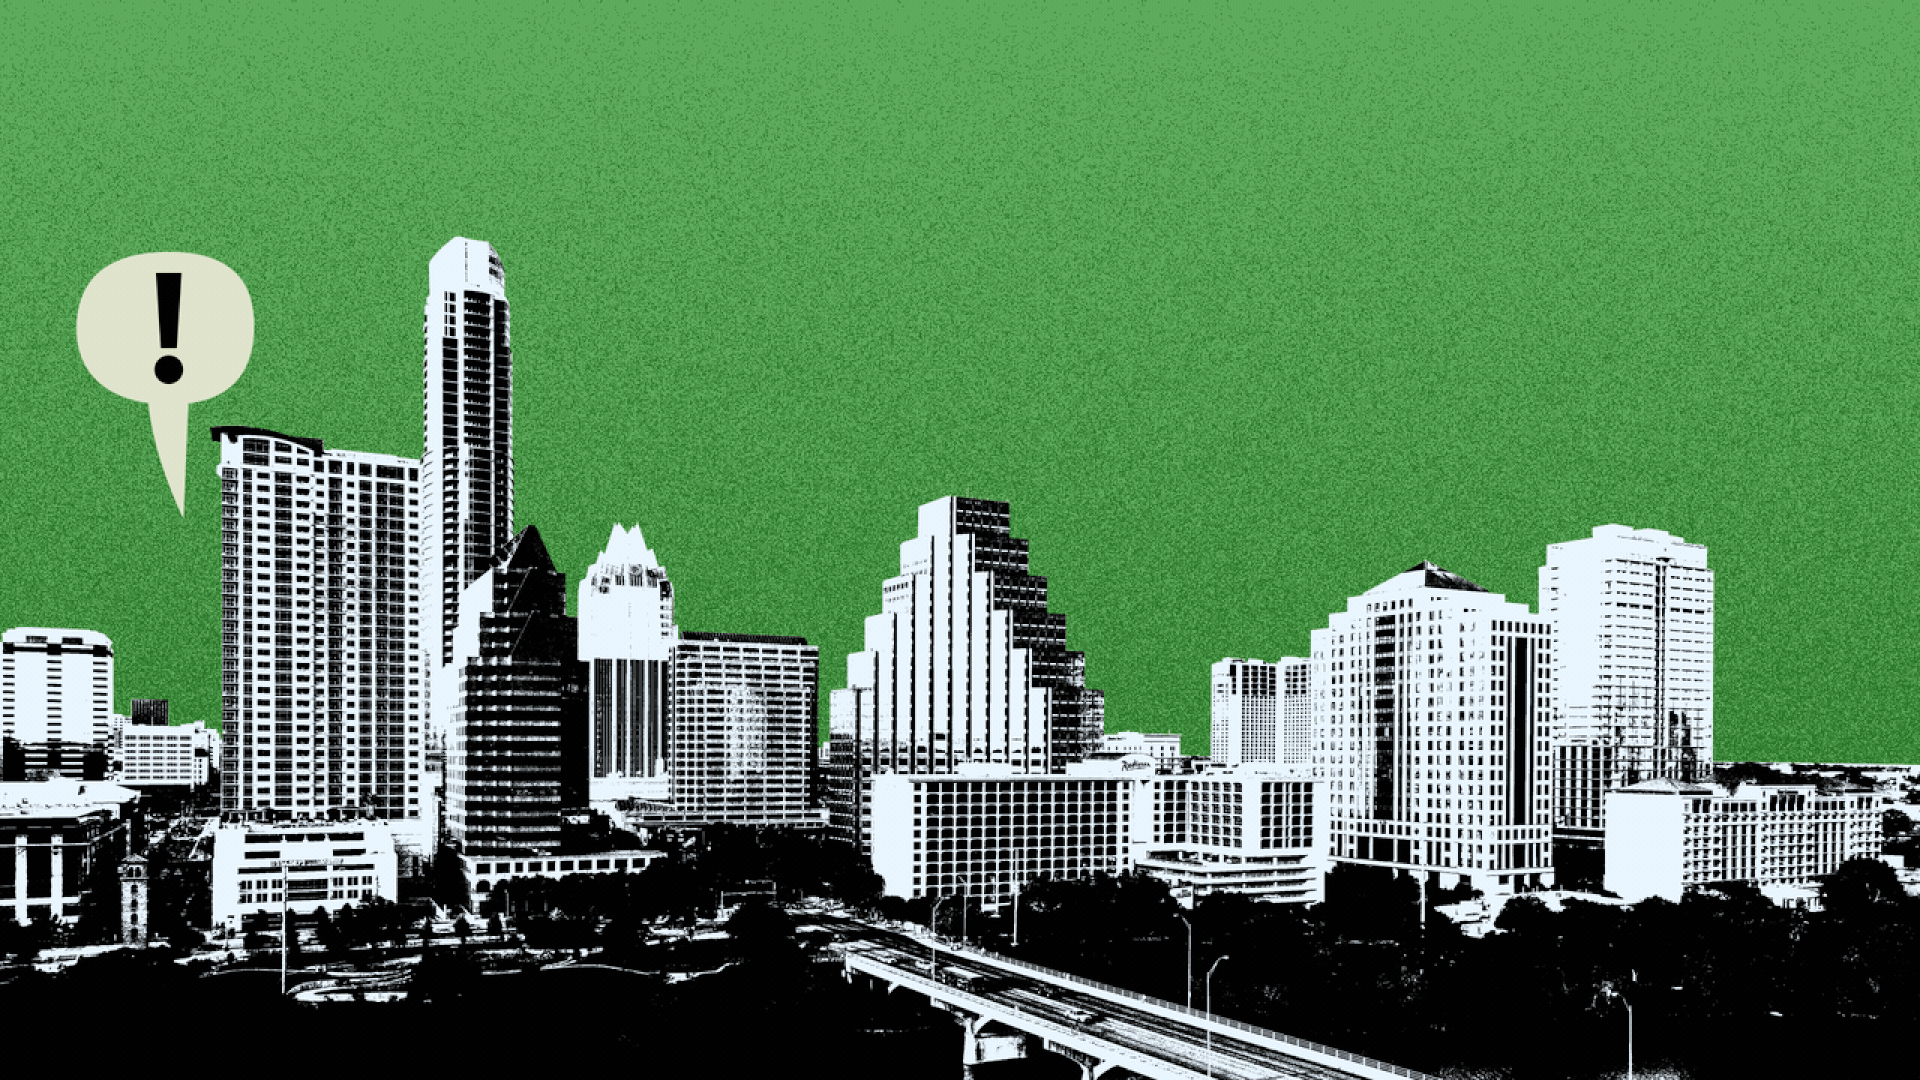 Illustration of the Austin skyline with word balloons with exclamation points popping up from left to right.